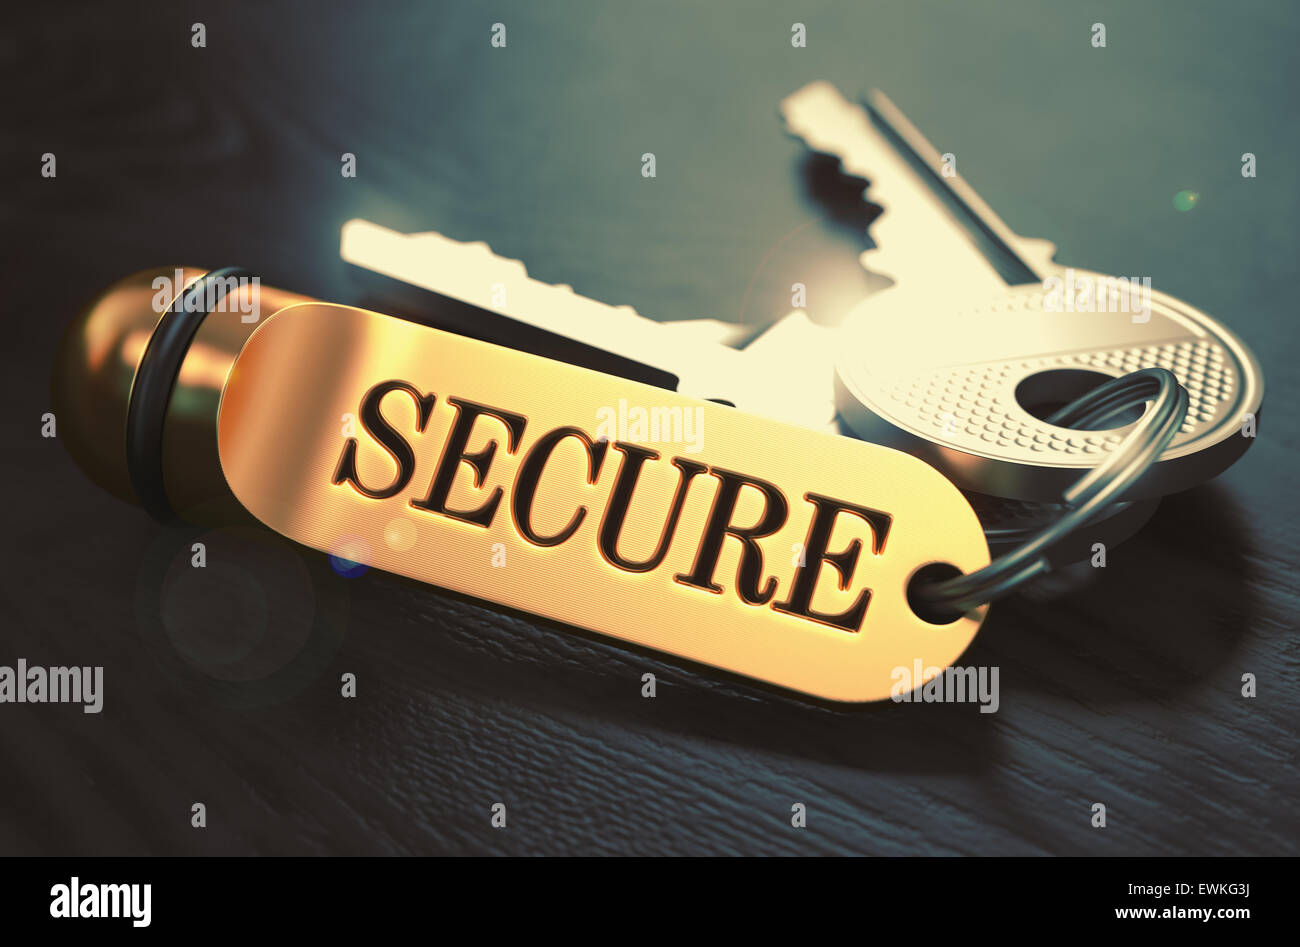 Secure - Bunch of Keys with Text on Golden Keychain. Stock Photo